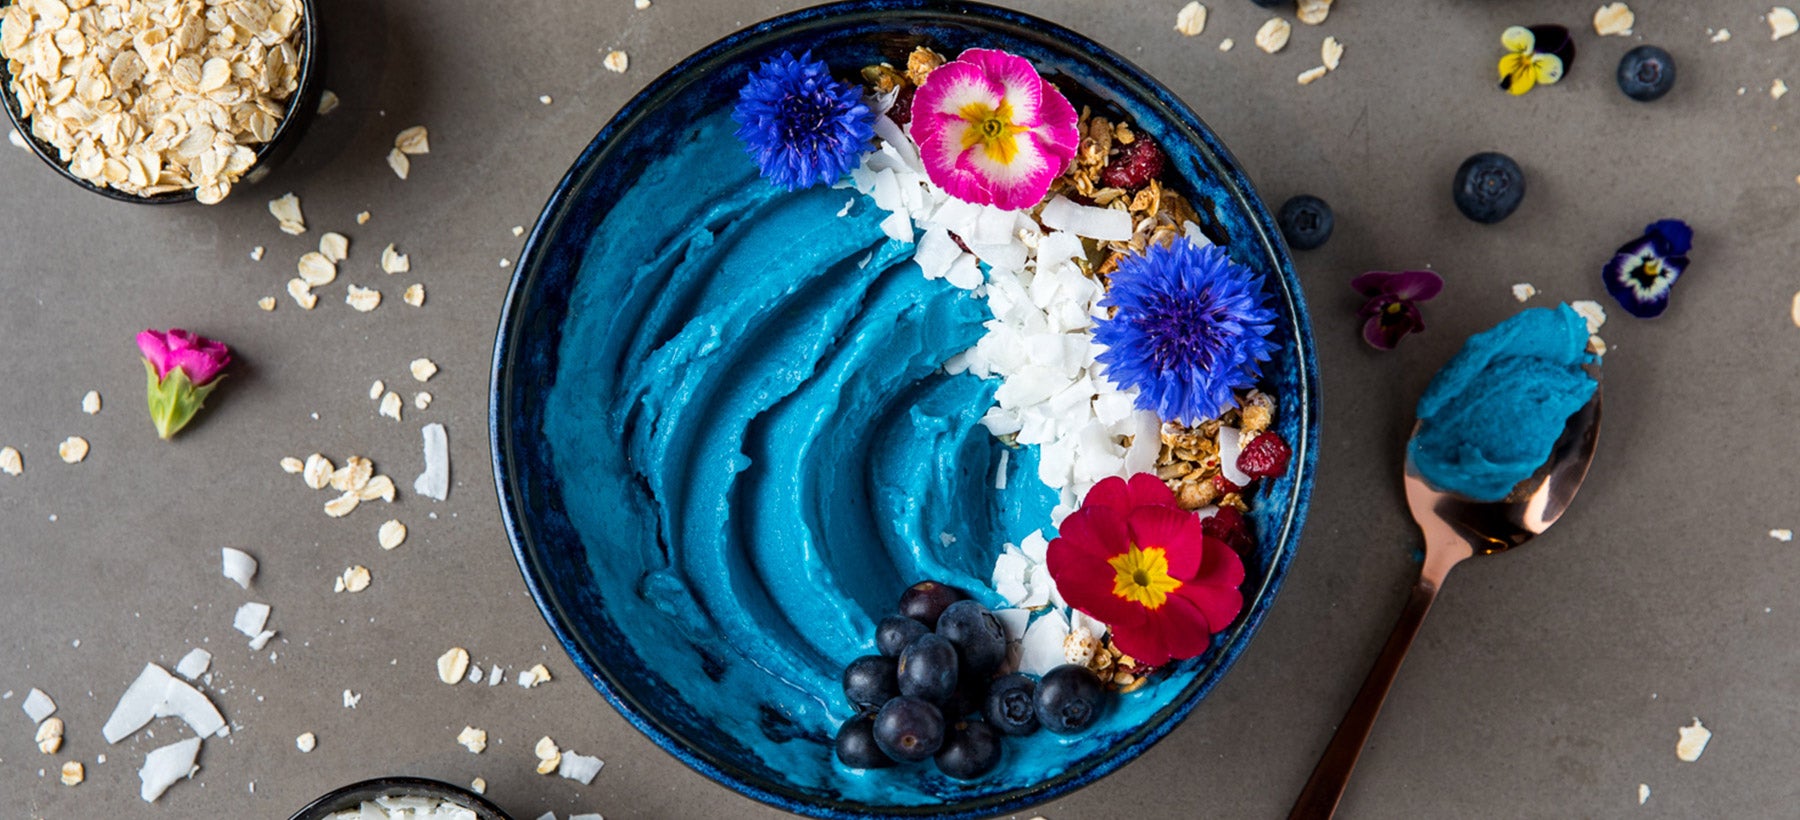 blue-oat-smoothie-bowl-decorated-with-flowers